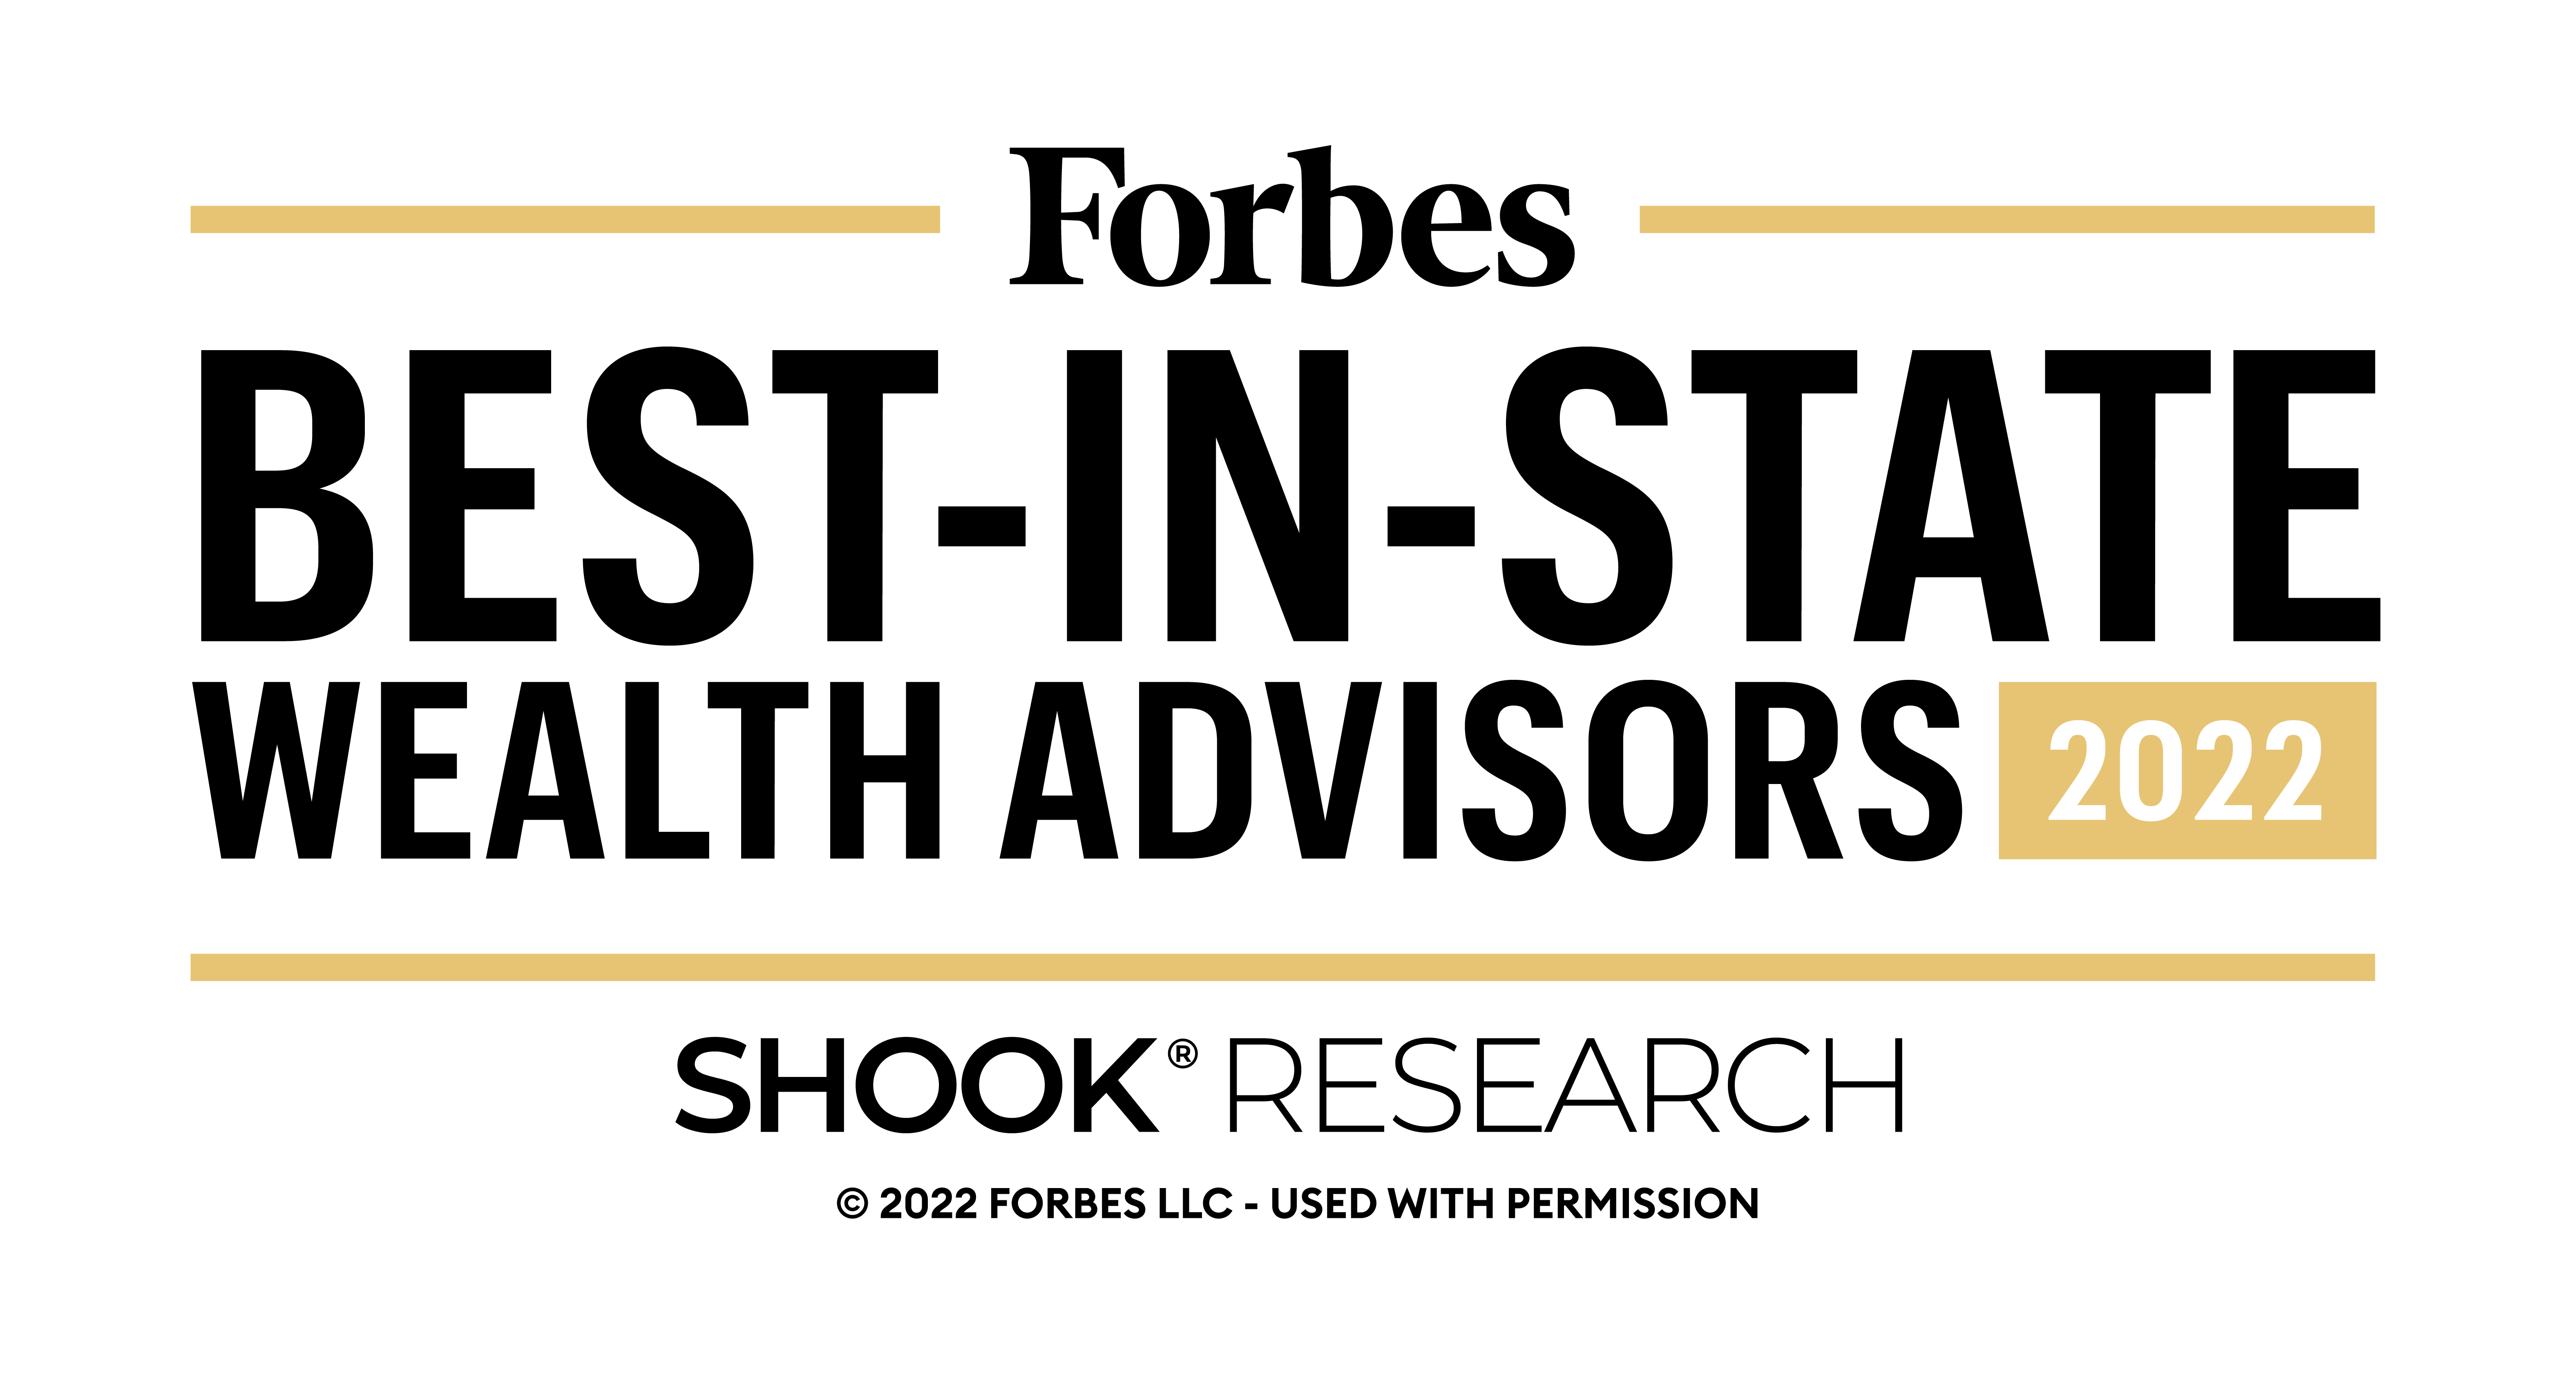 forbes best in state wealth advisors Charles Parry 2019-2021 and Curtis Pary 2021 